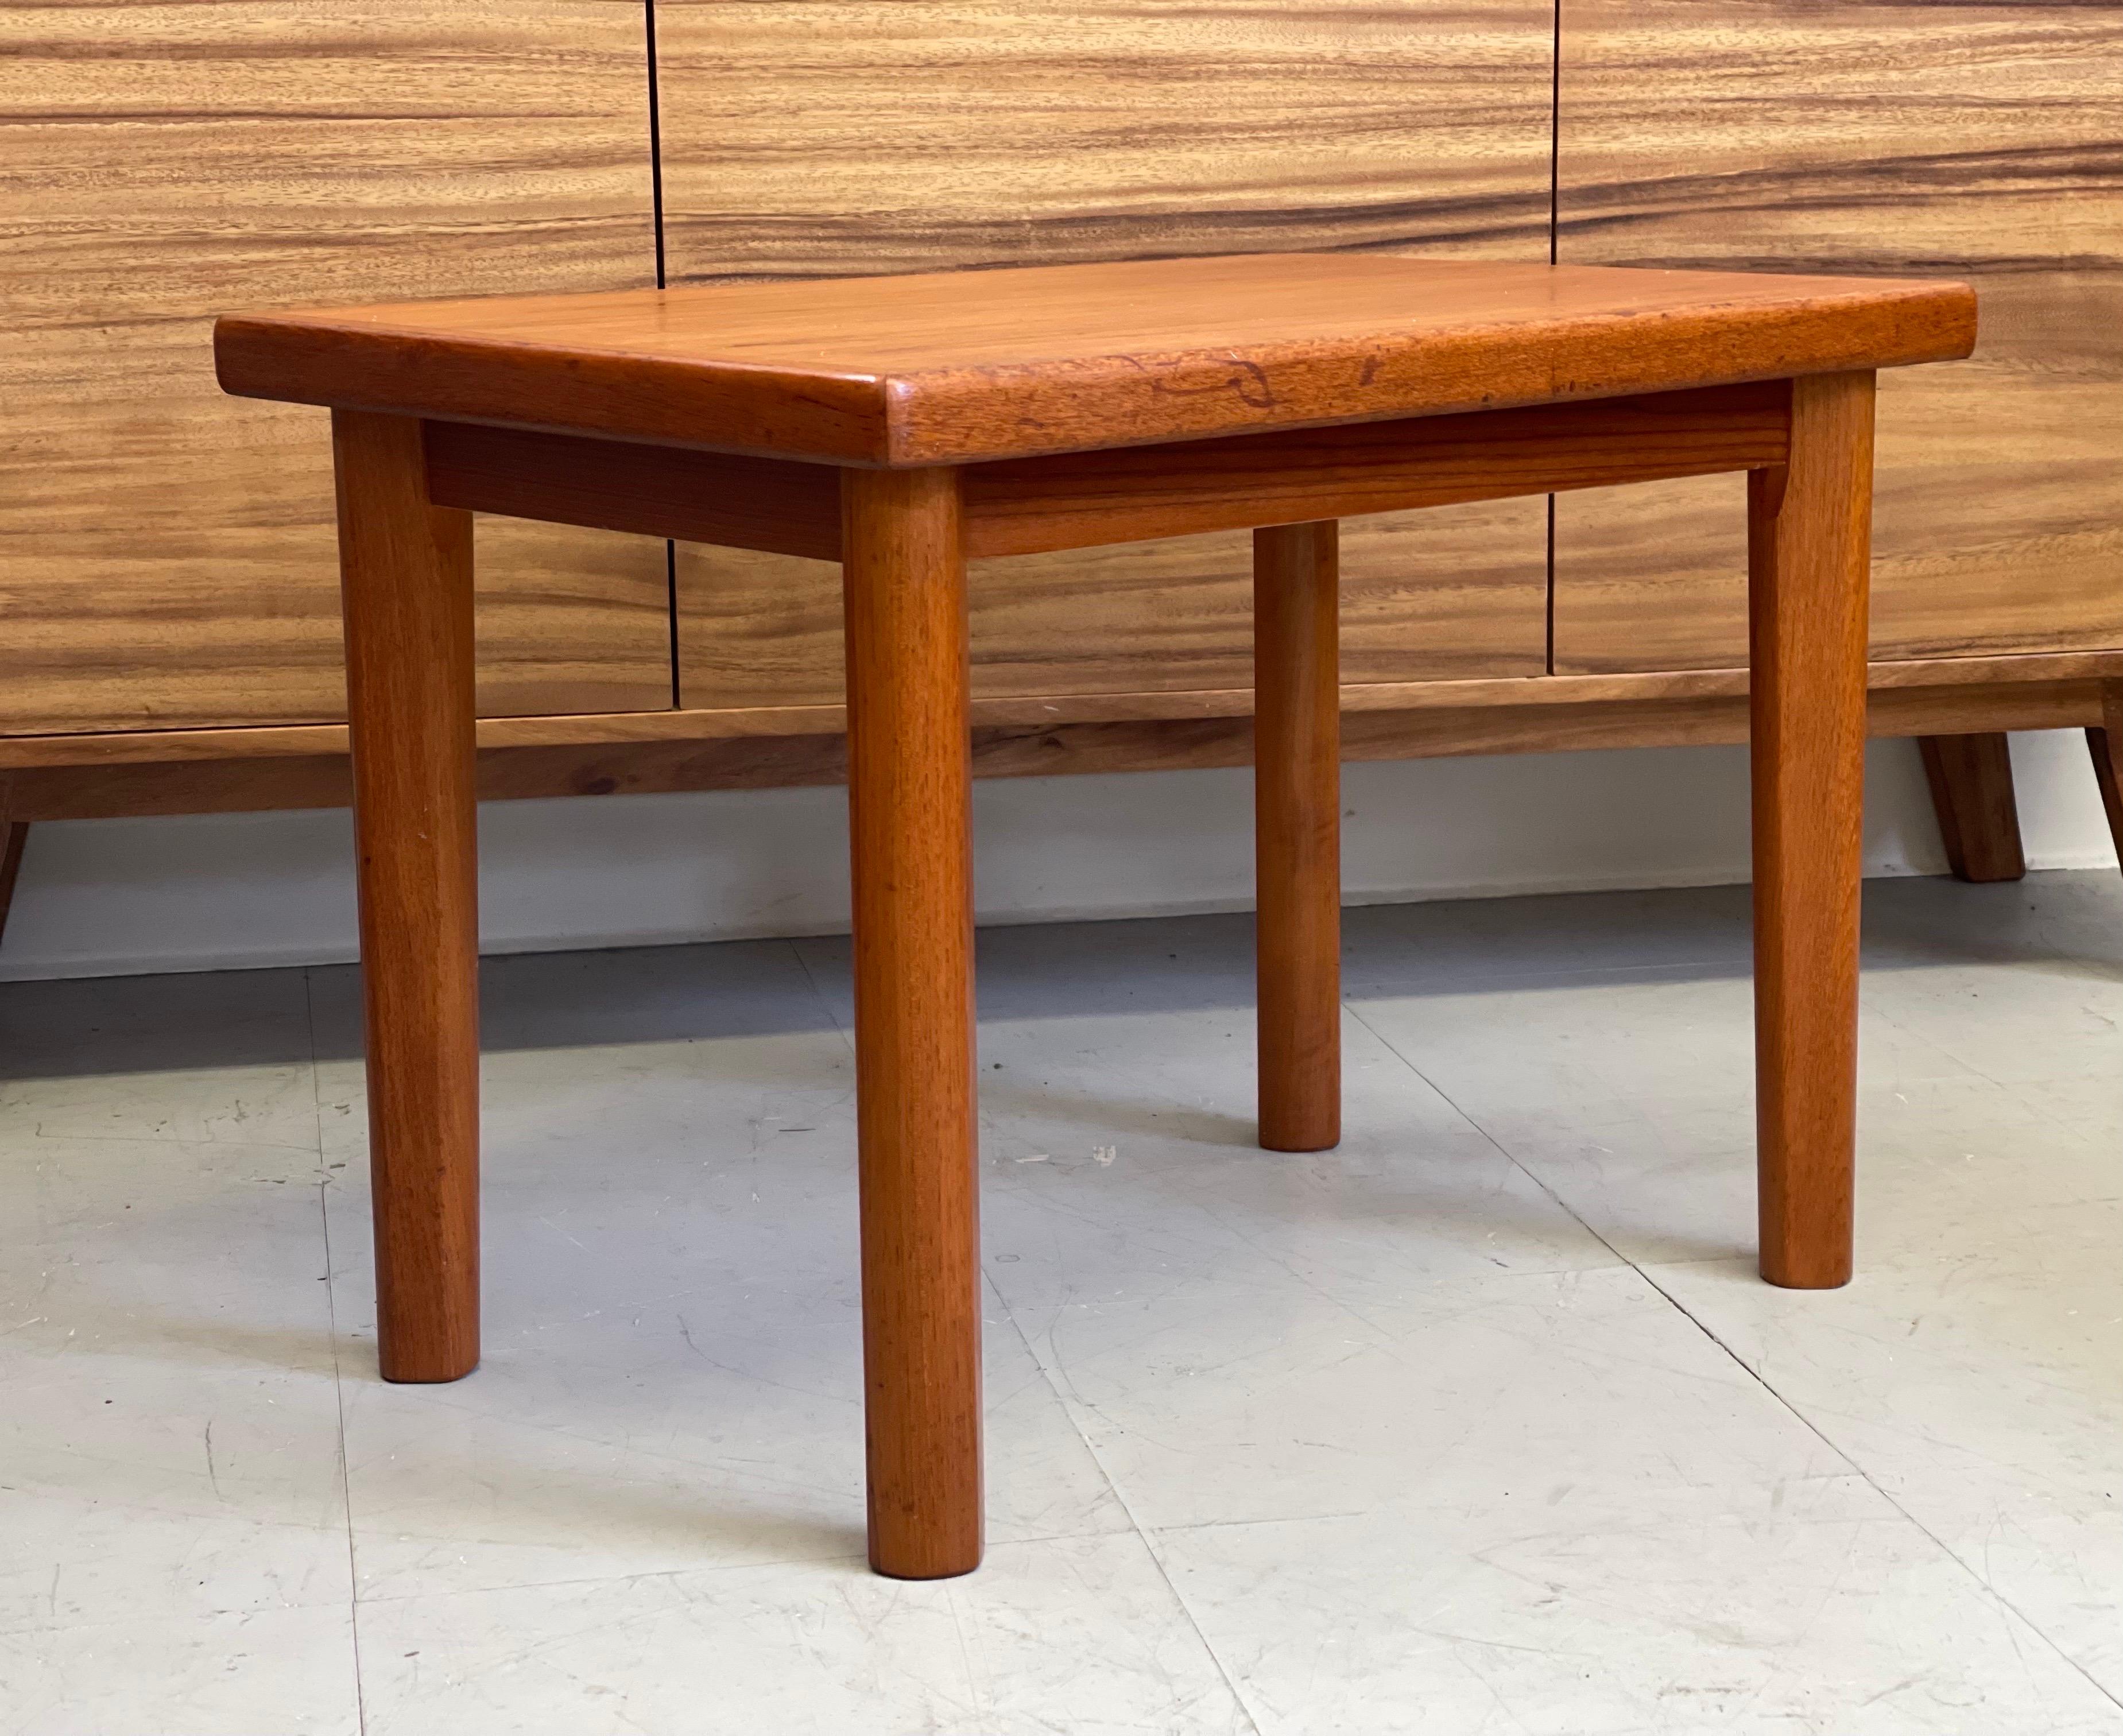 Vintage Danish Modern Mid-Century Modern Accent Table

Dimensions. 25 1/2 W ; 17 1/2 D ; 18 1/2 H.